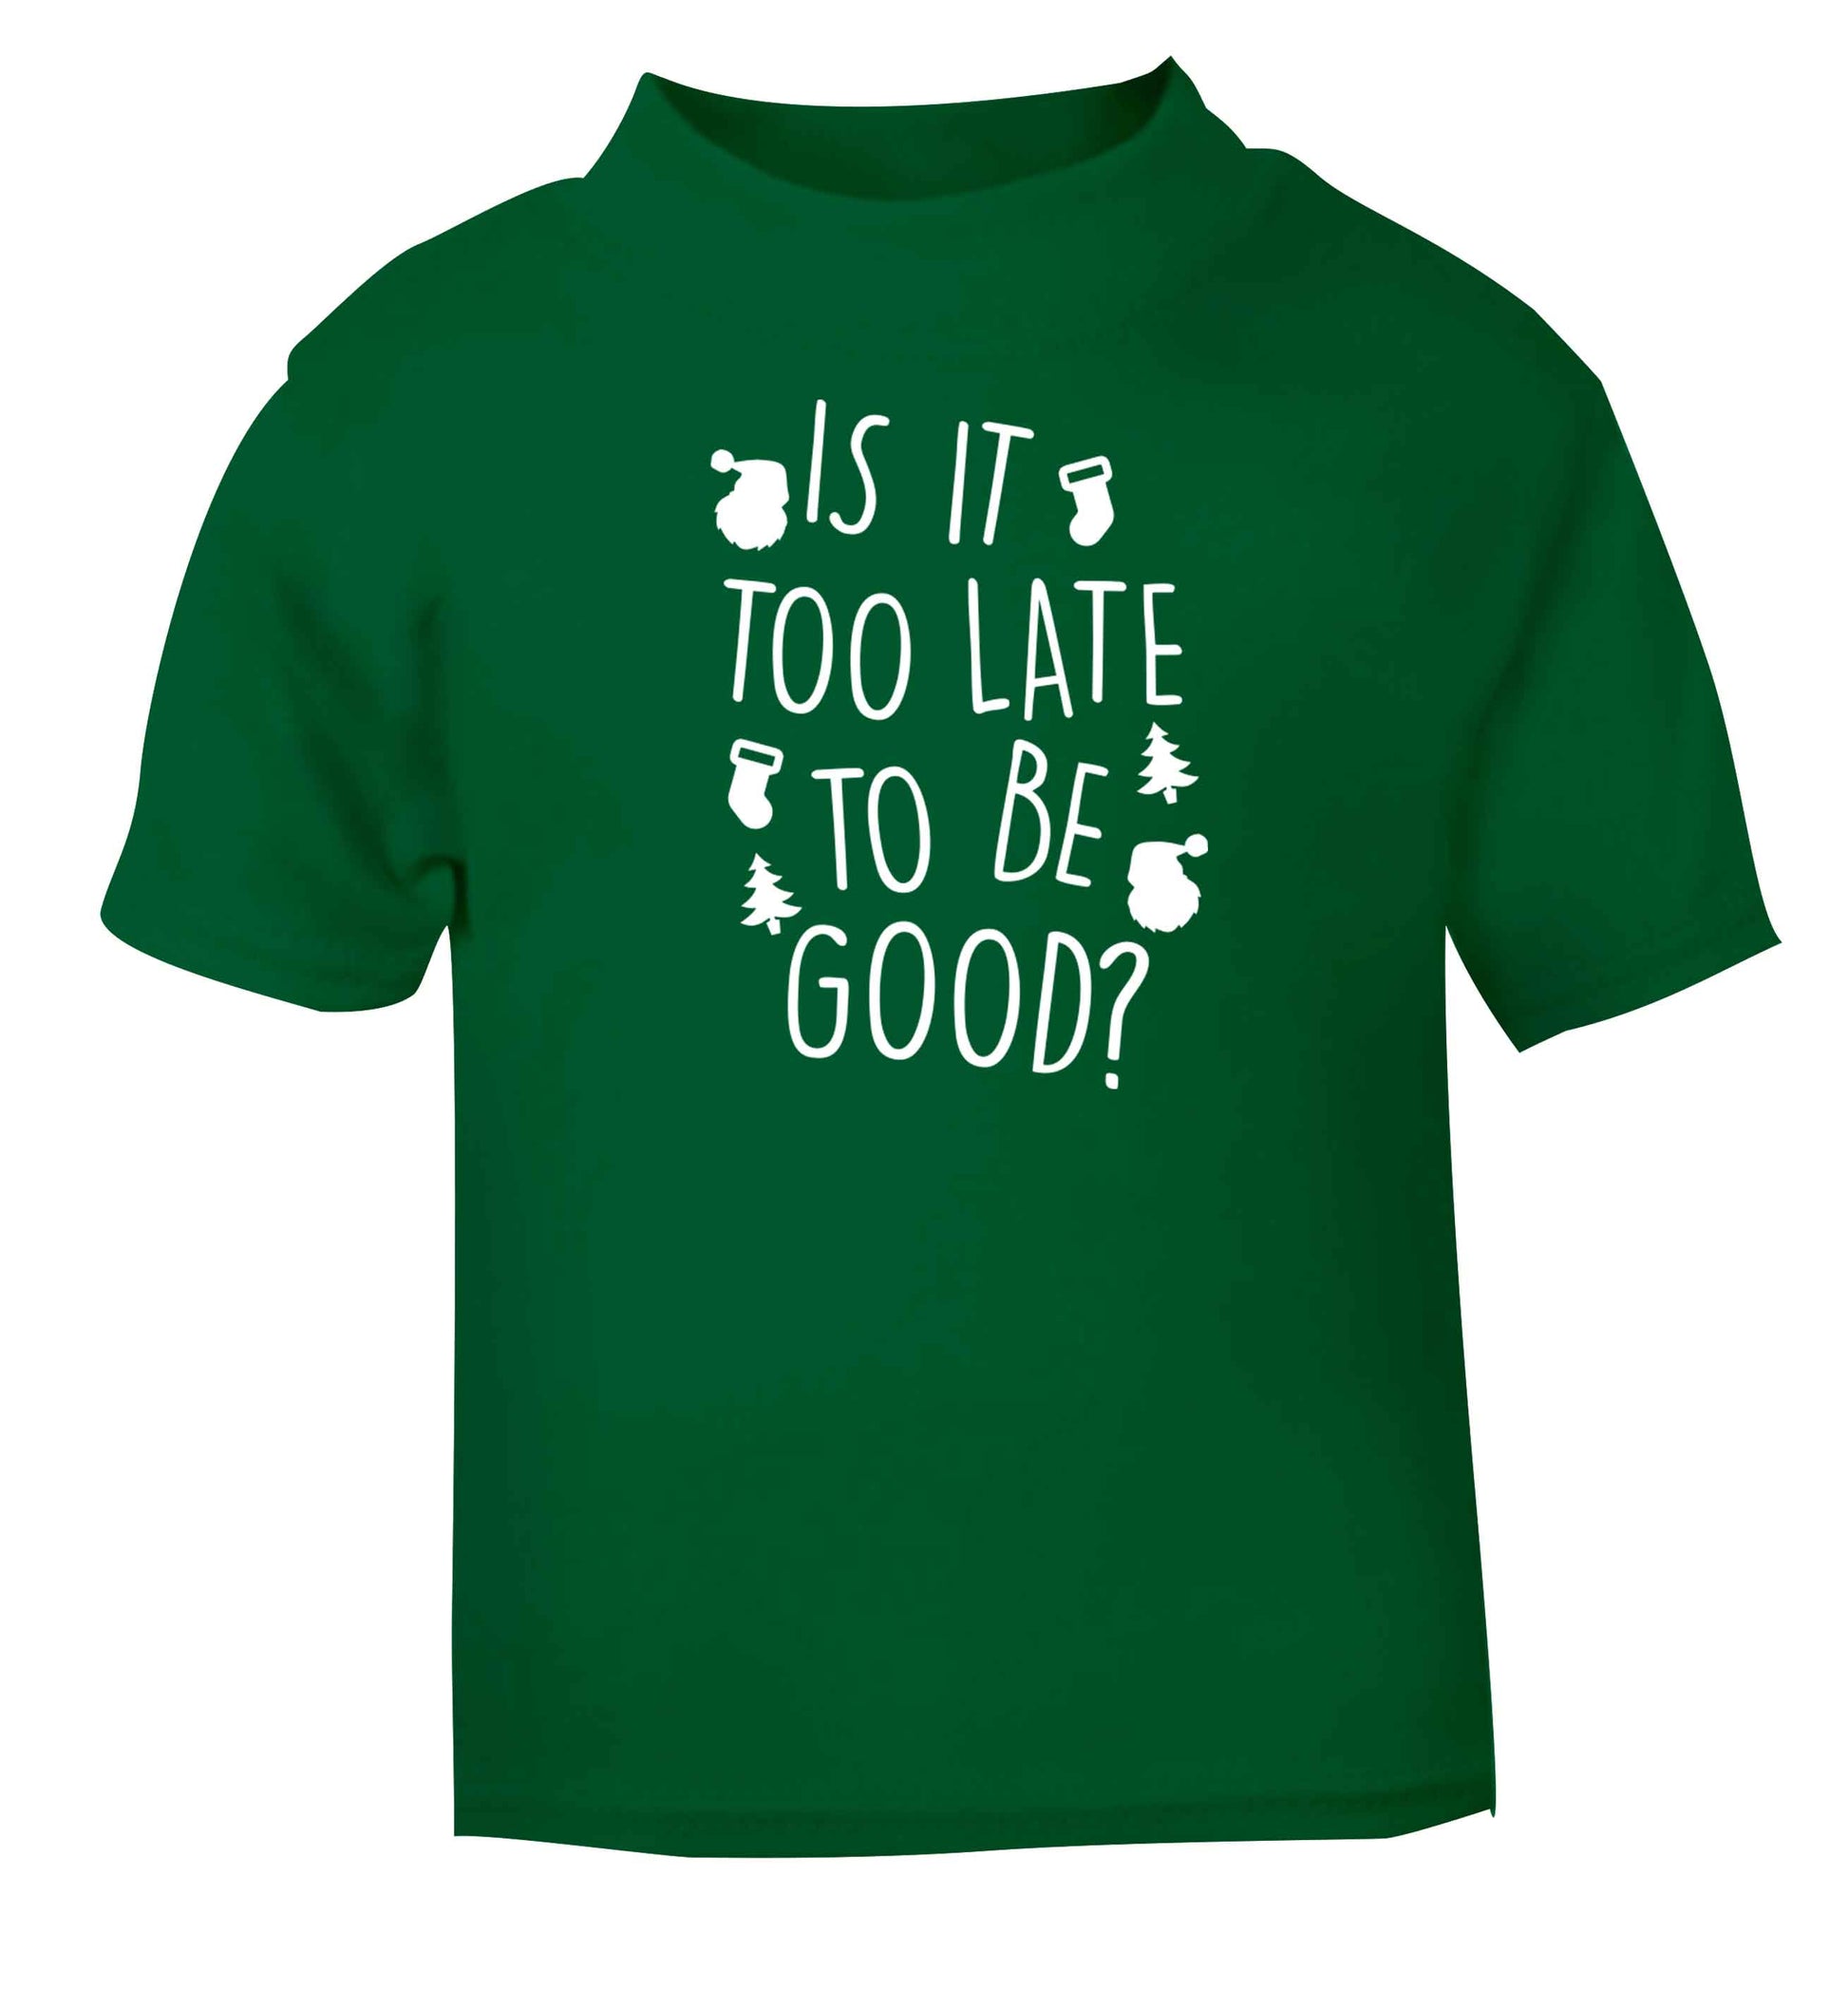 Too Late to be Good green baby toddler Tshirt 2 Years